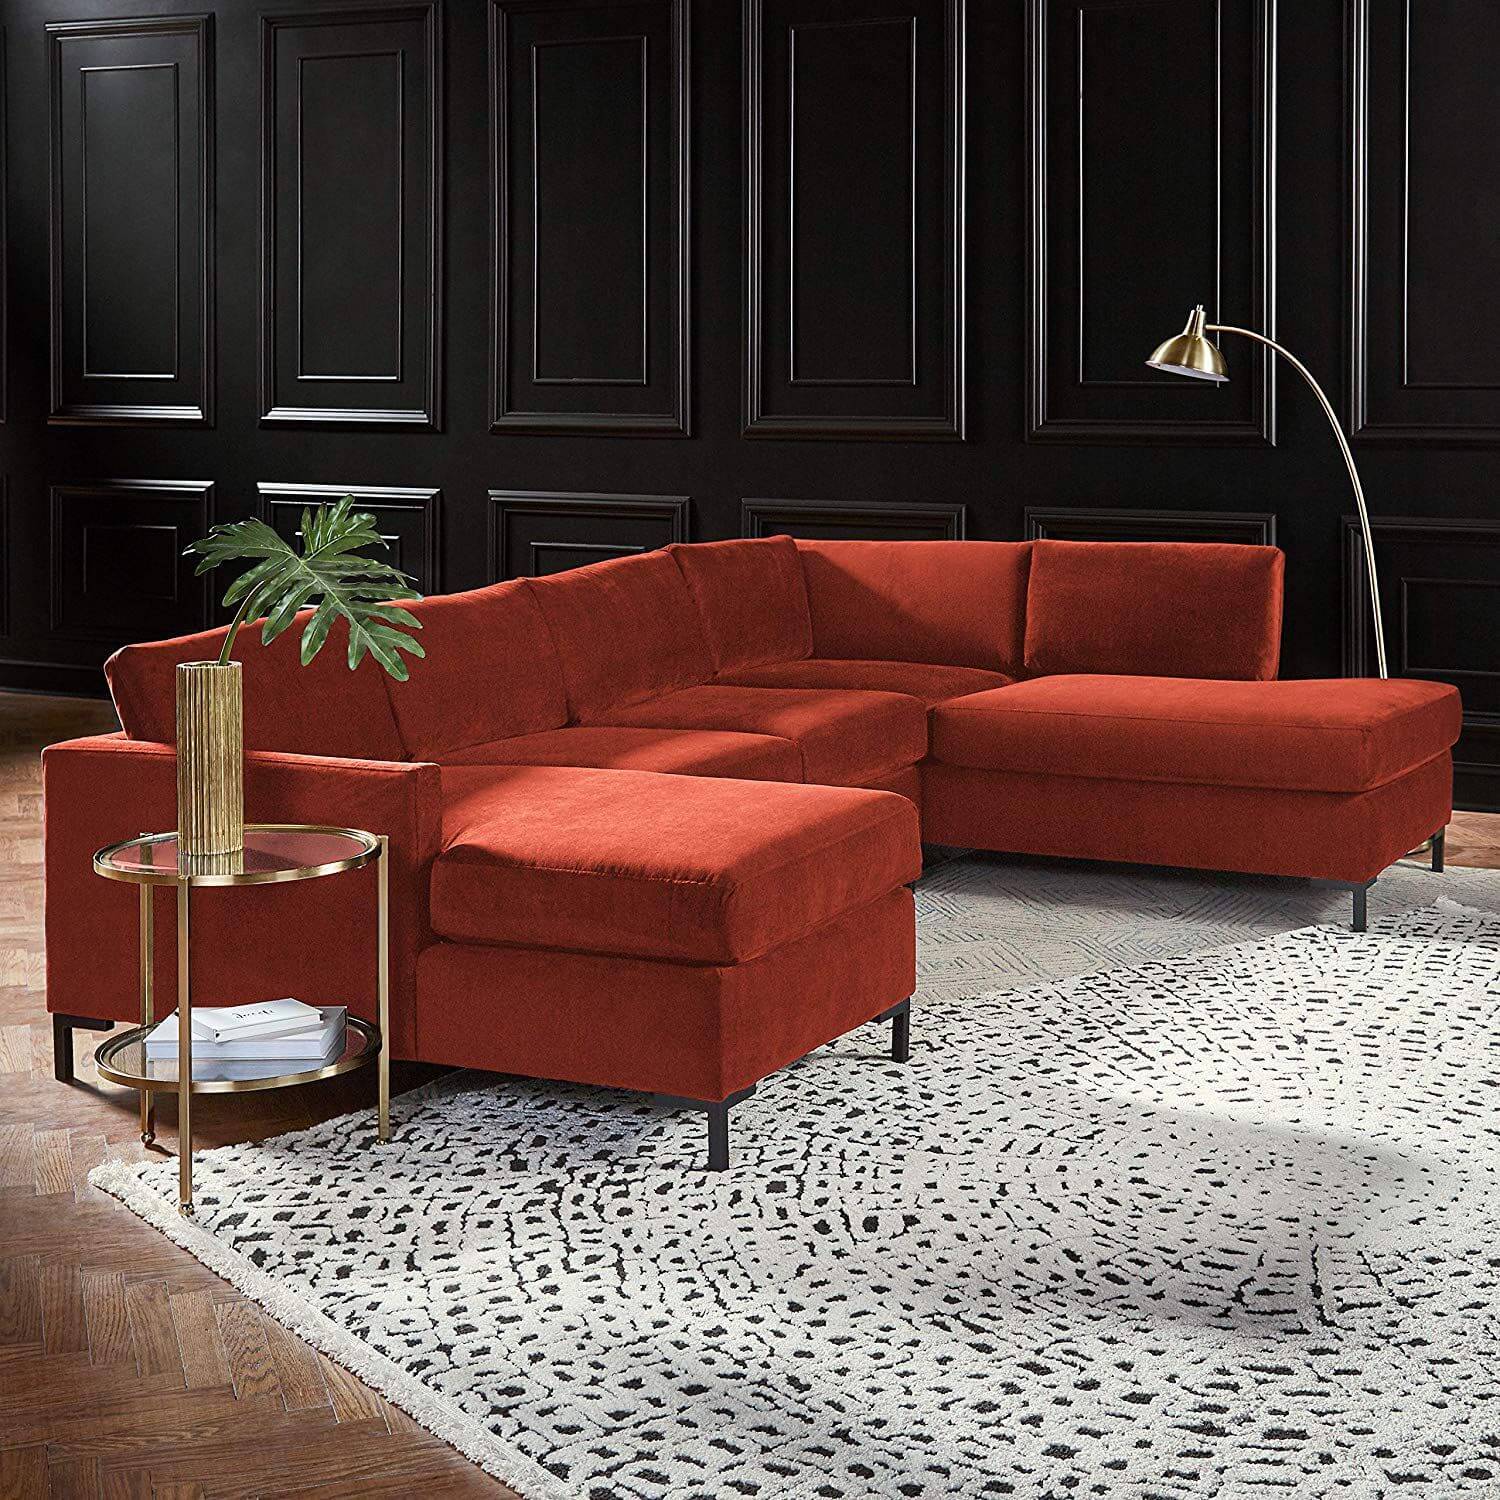  best sectional sofa